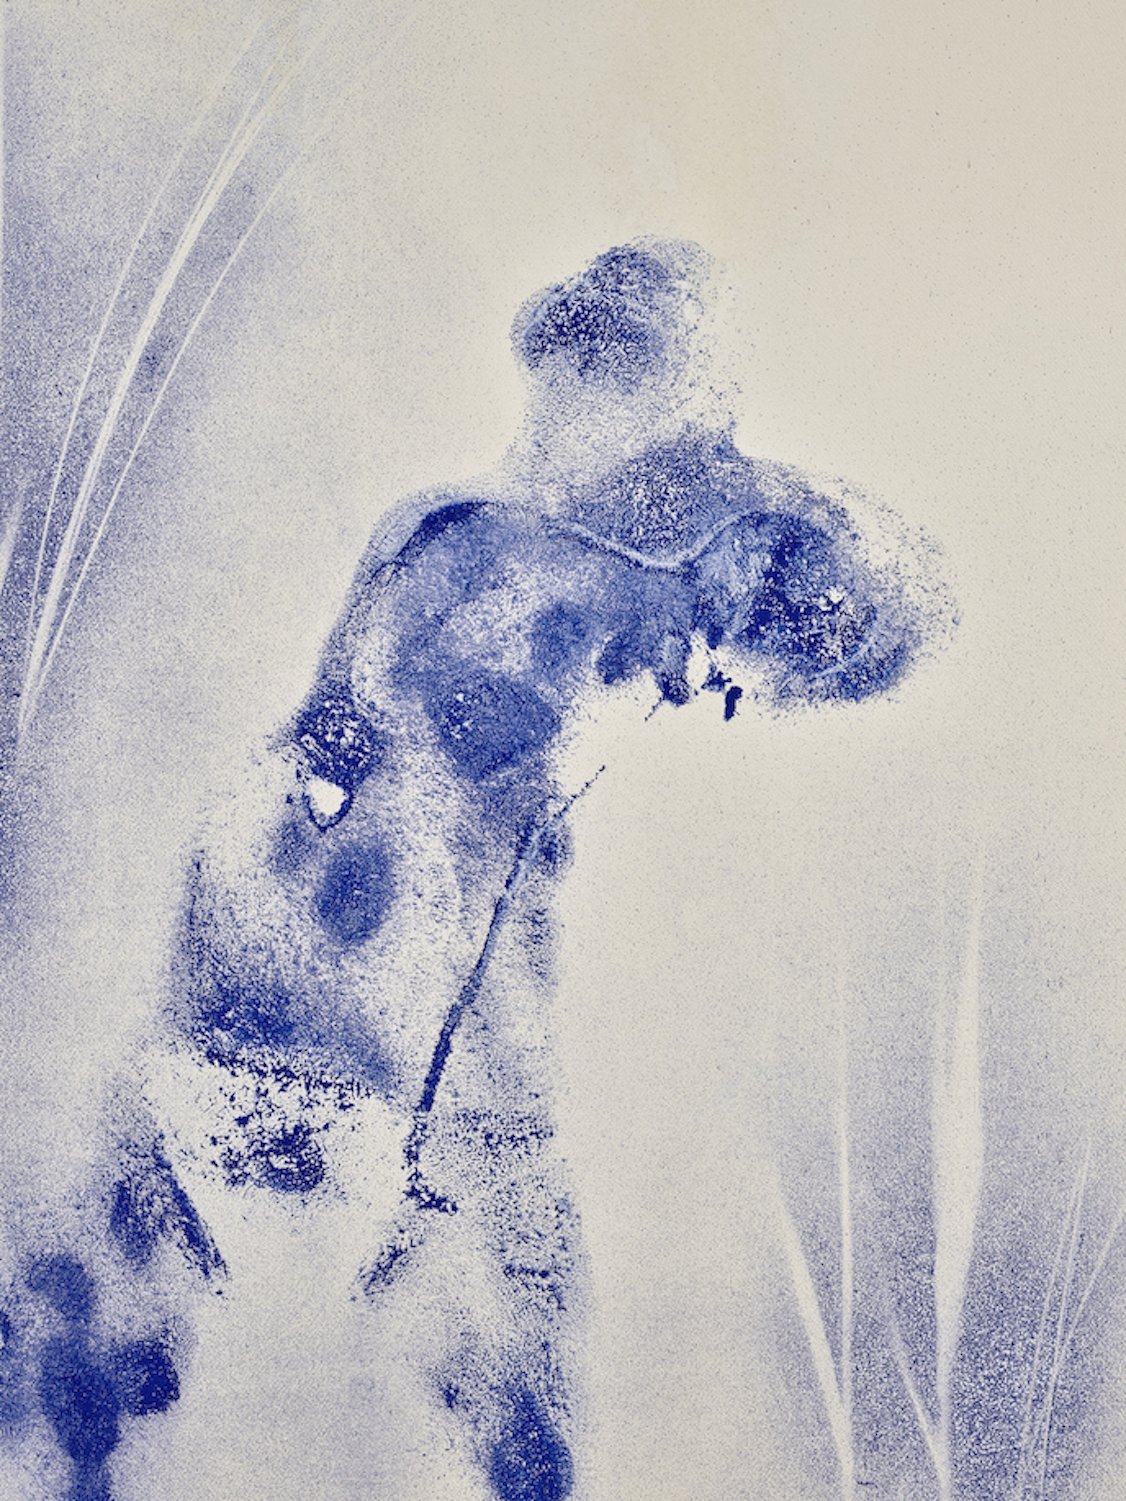 Detail view of Yves Klein's painting Anthropometrie sans titre (ANT 162)